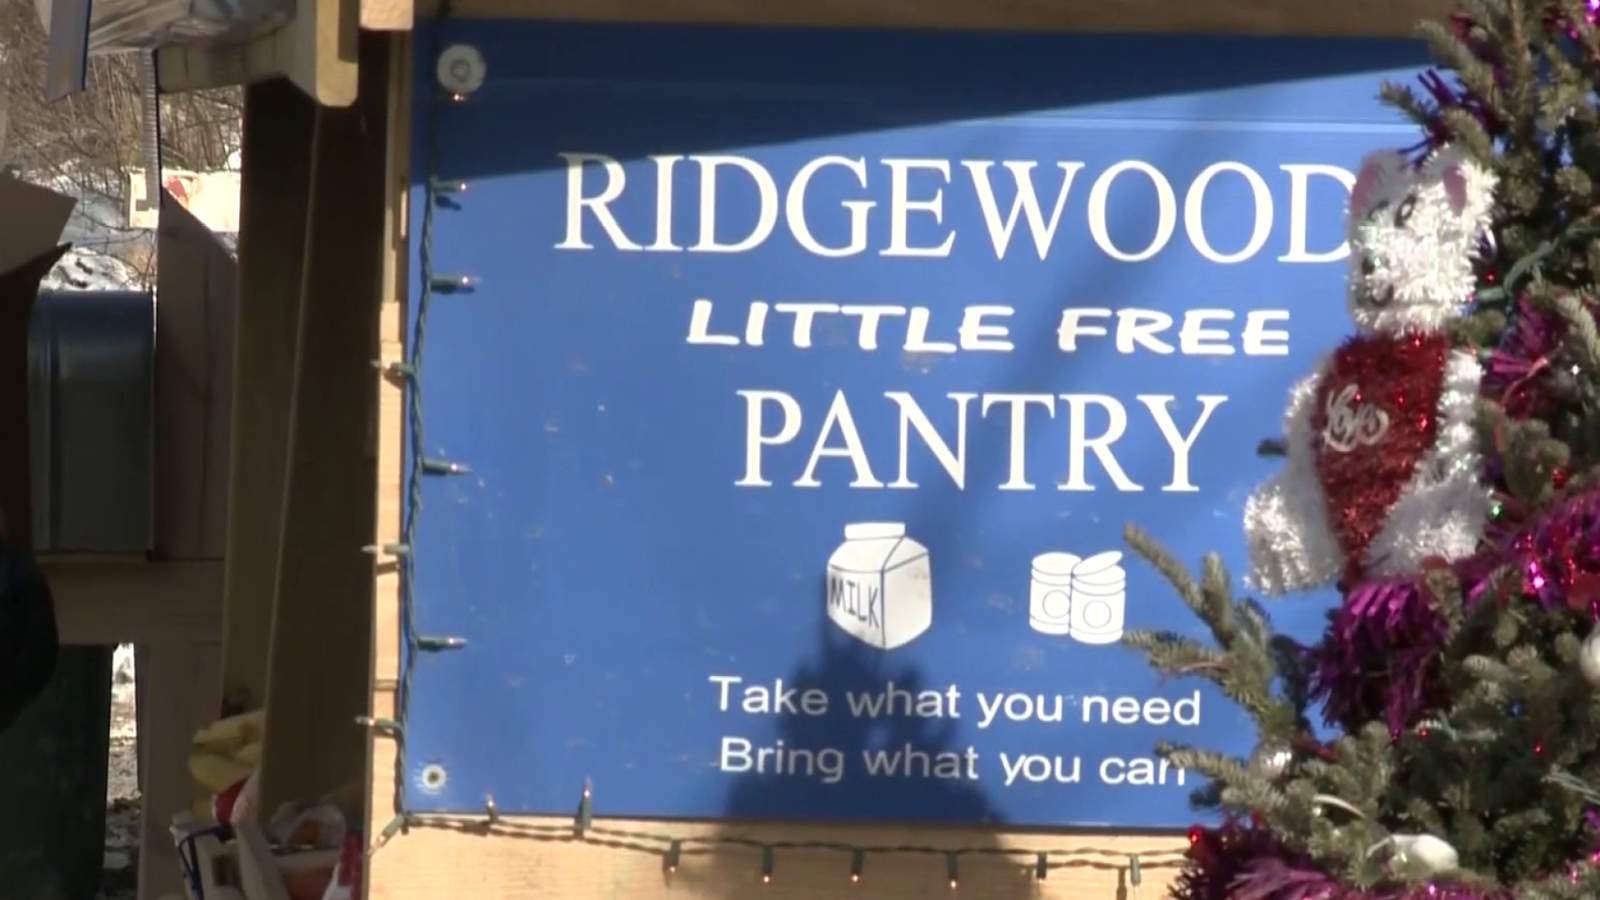 Ridgewood’s Little Free Pantry: Clarkston community bands together to help neighbors in need